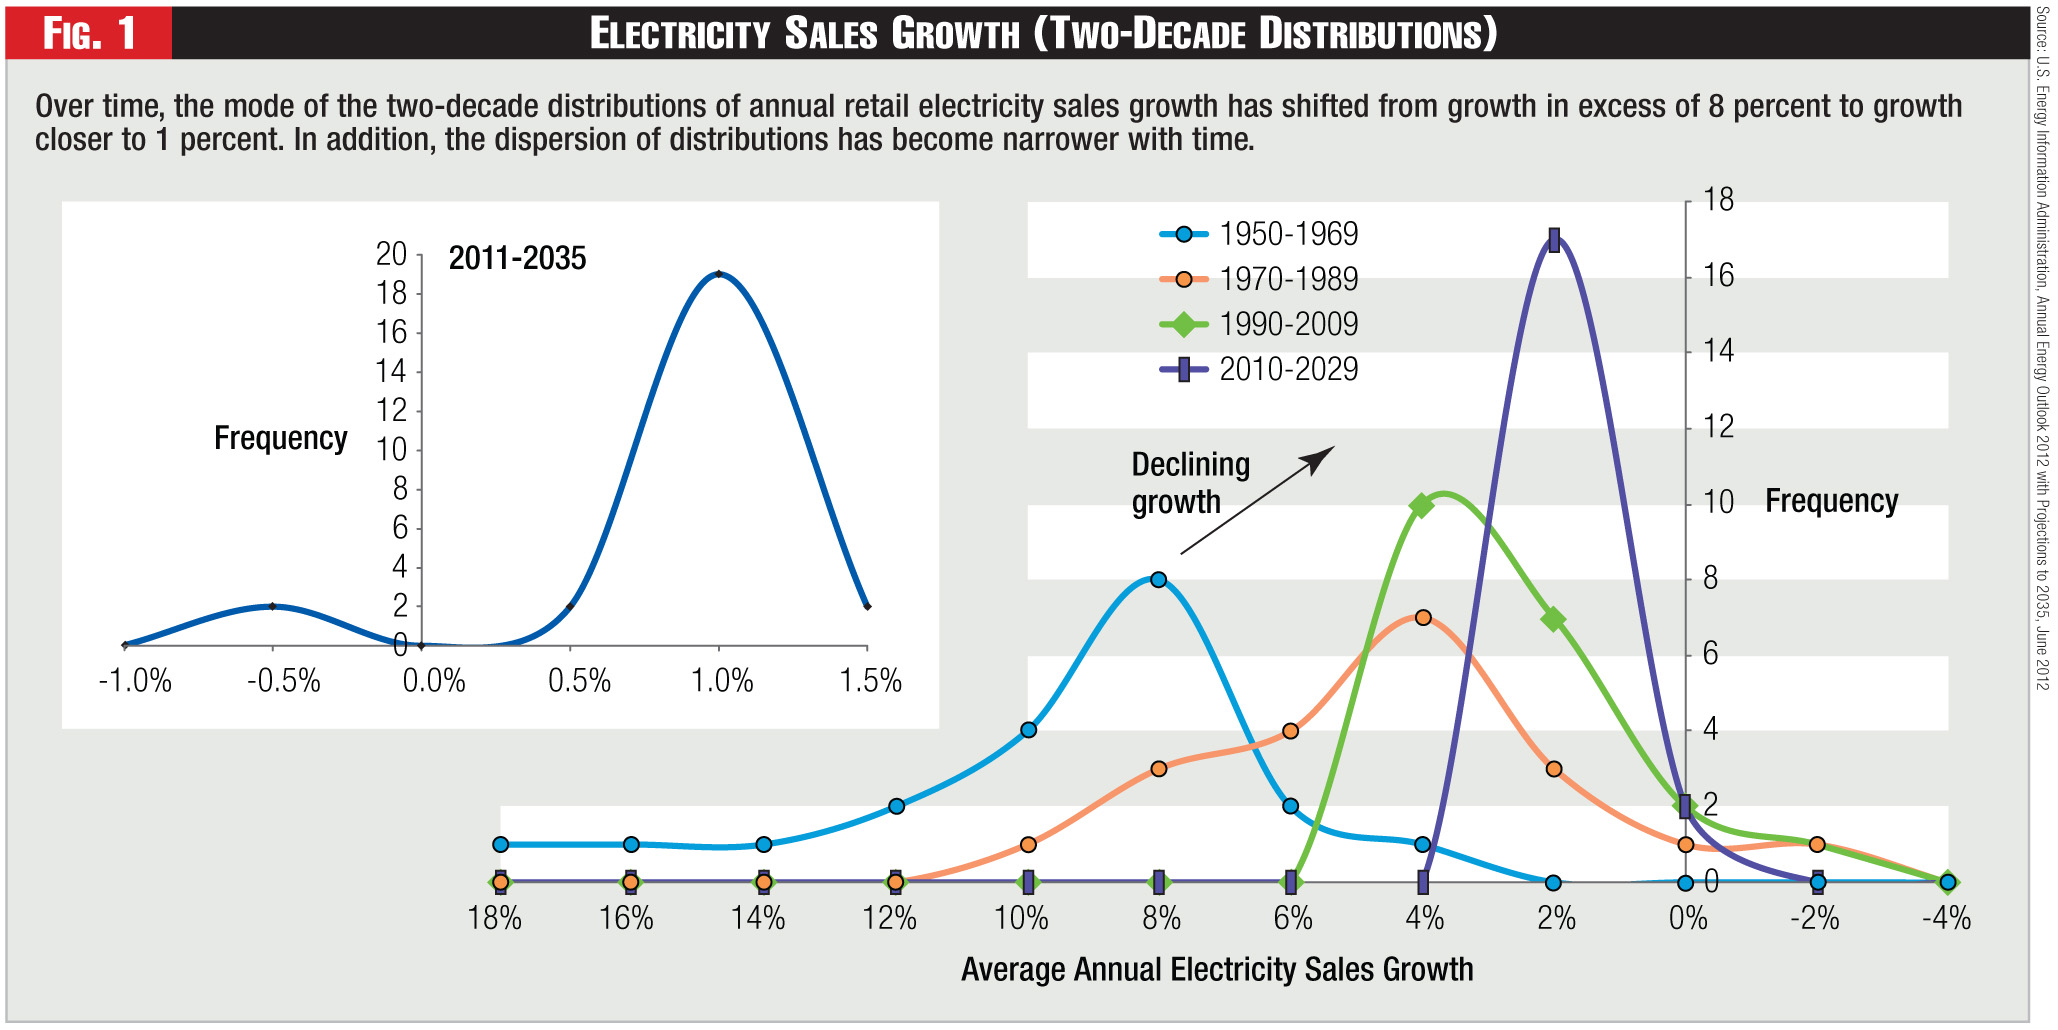 Figure 1 - Electricity Sales Growth (Two-Decade Distributions)